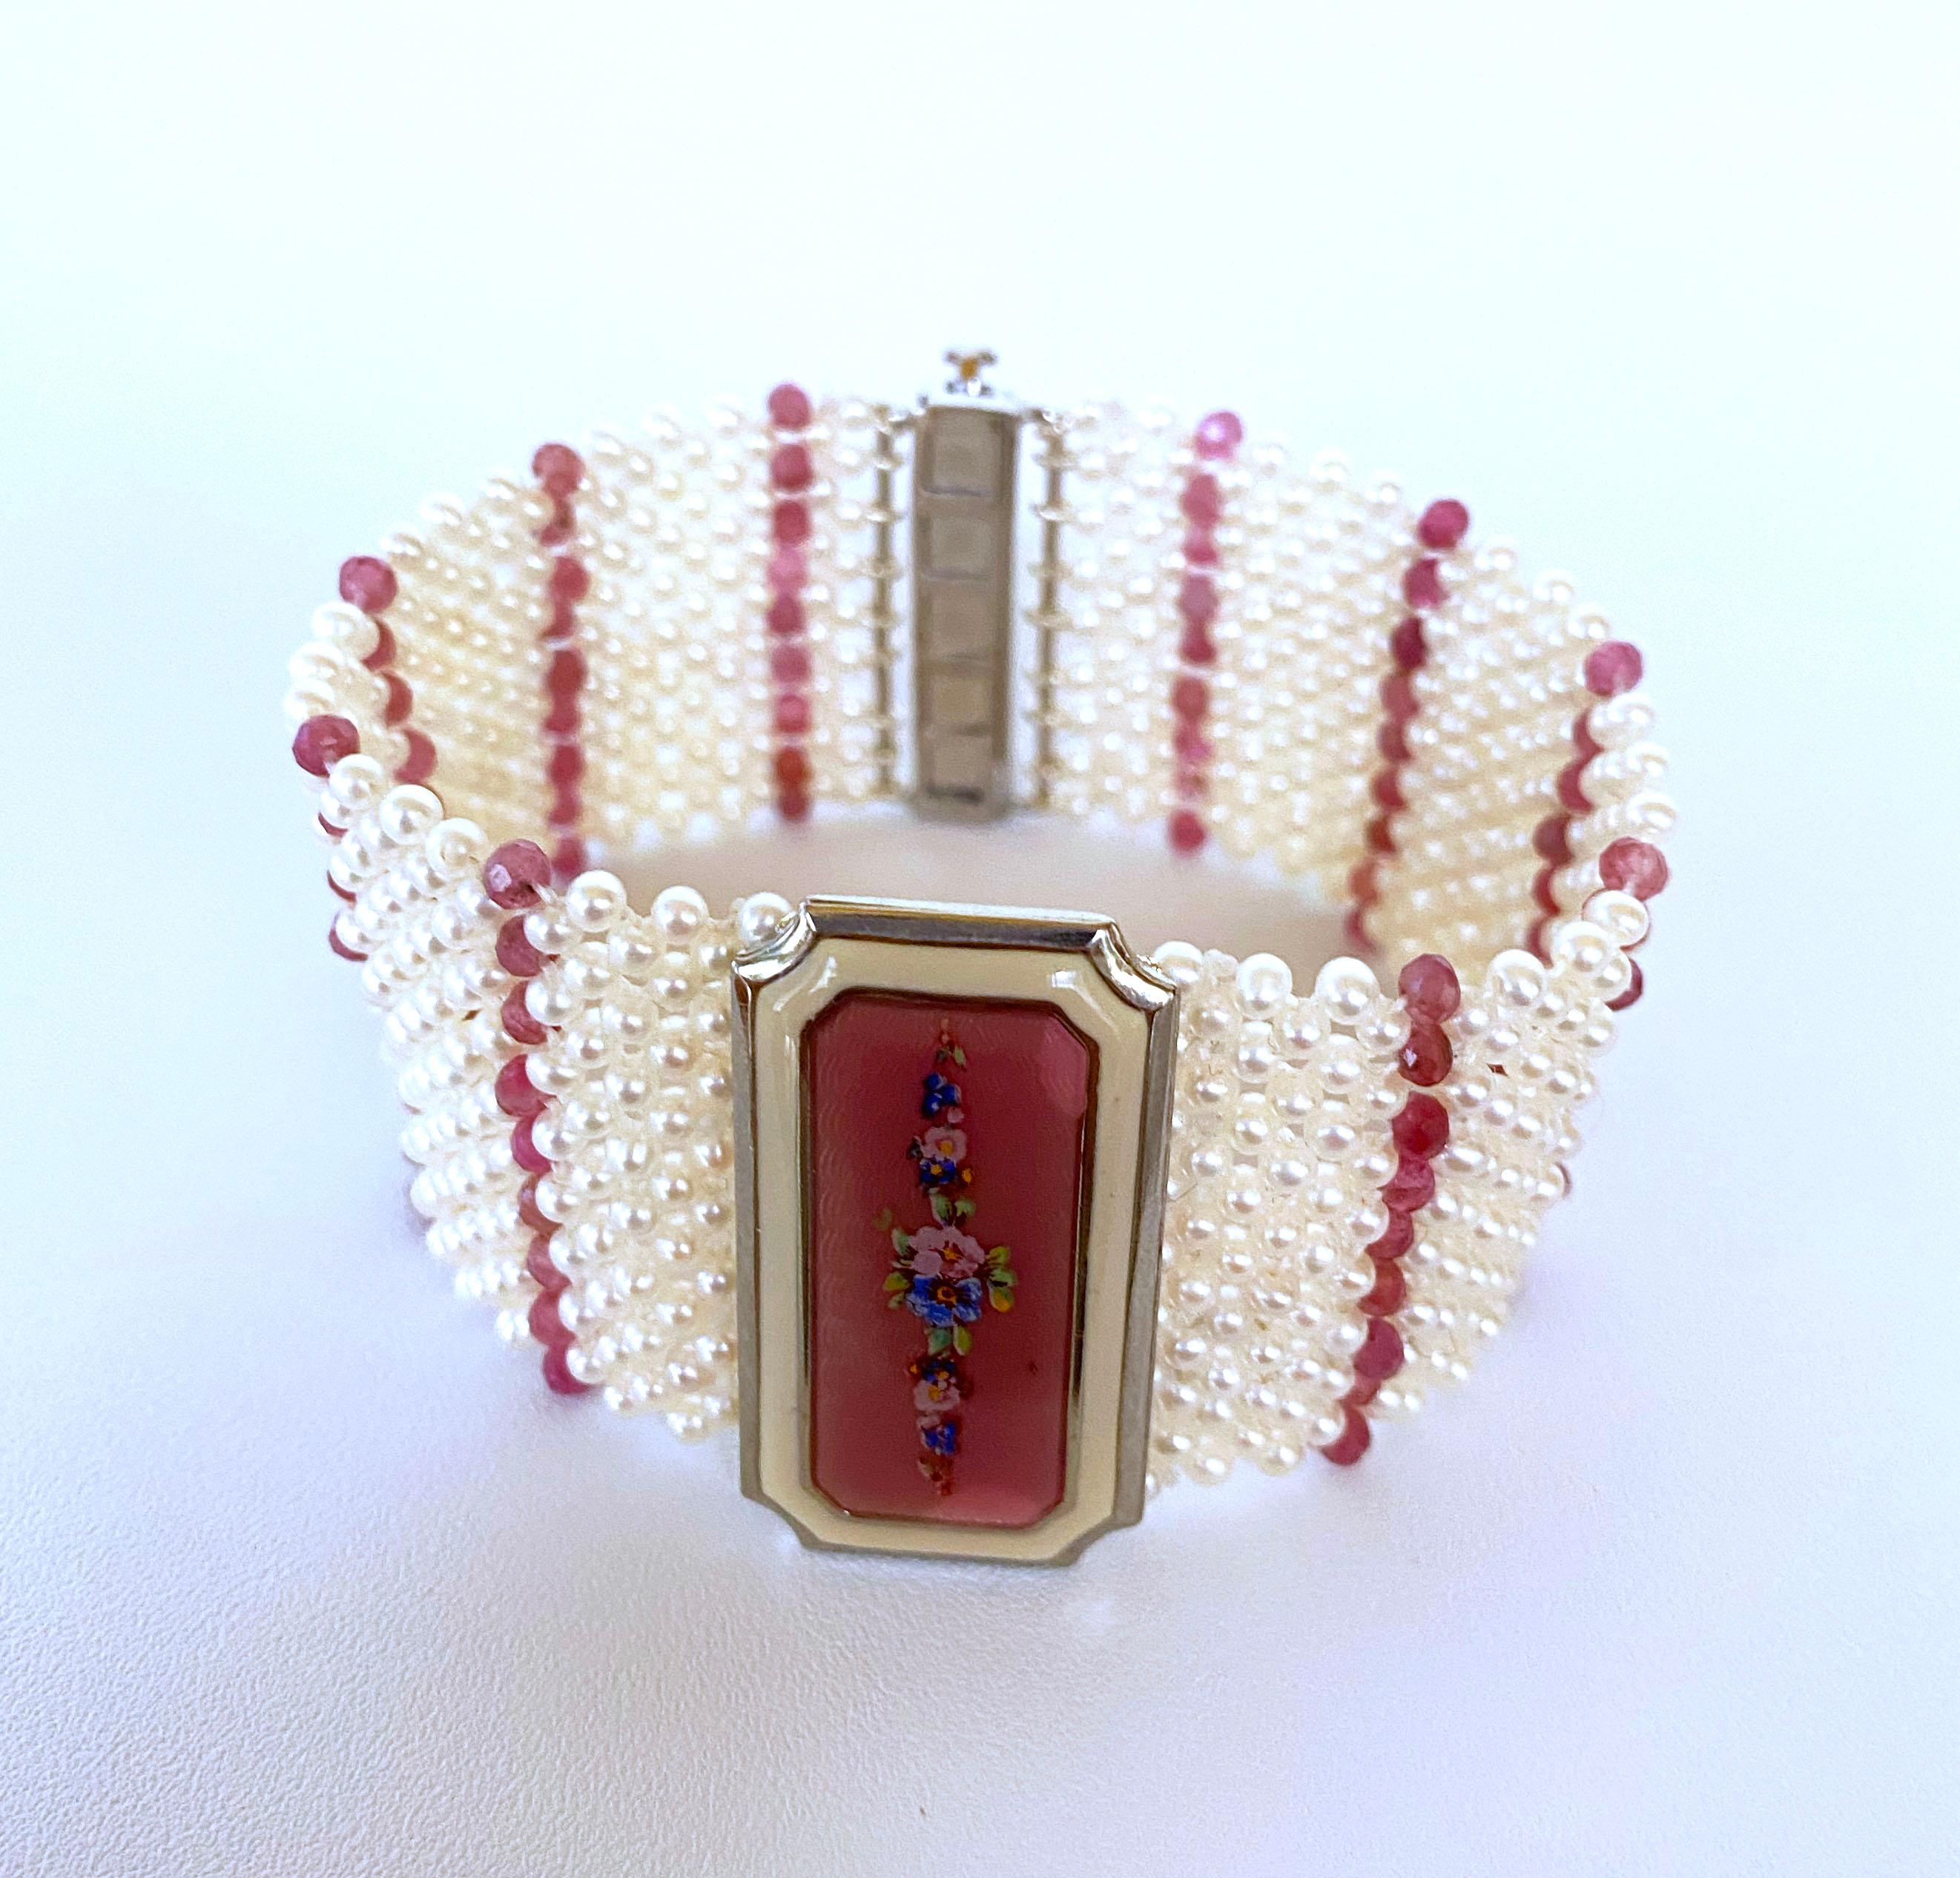 Handmade bracelet by Marina J. Bracelet features a vintage 1940s Enamel brooch with a floral design, reworked  into a magnificent centerpiece. This intricately woven bracelet is made with small high luster white/cream Pearls and beautiful baby Pink